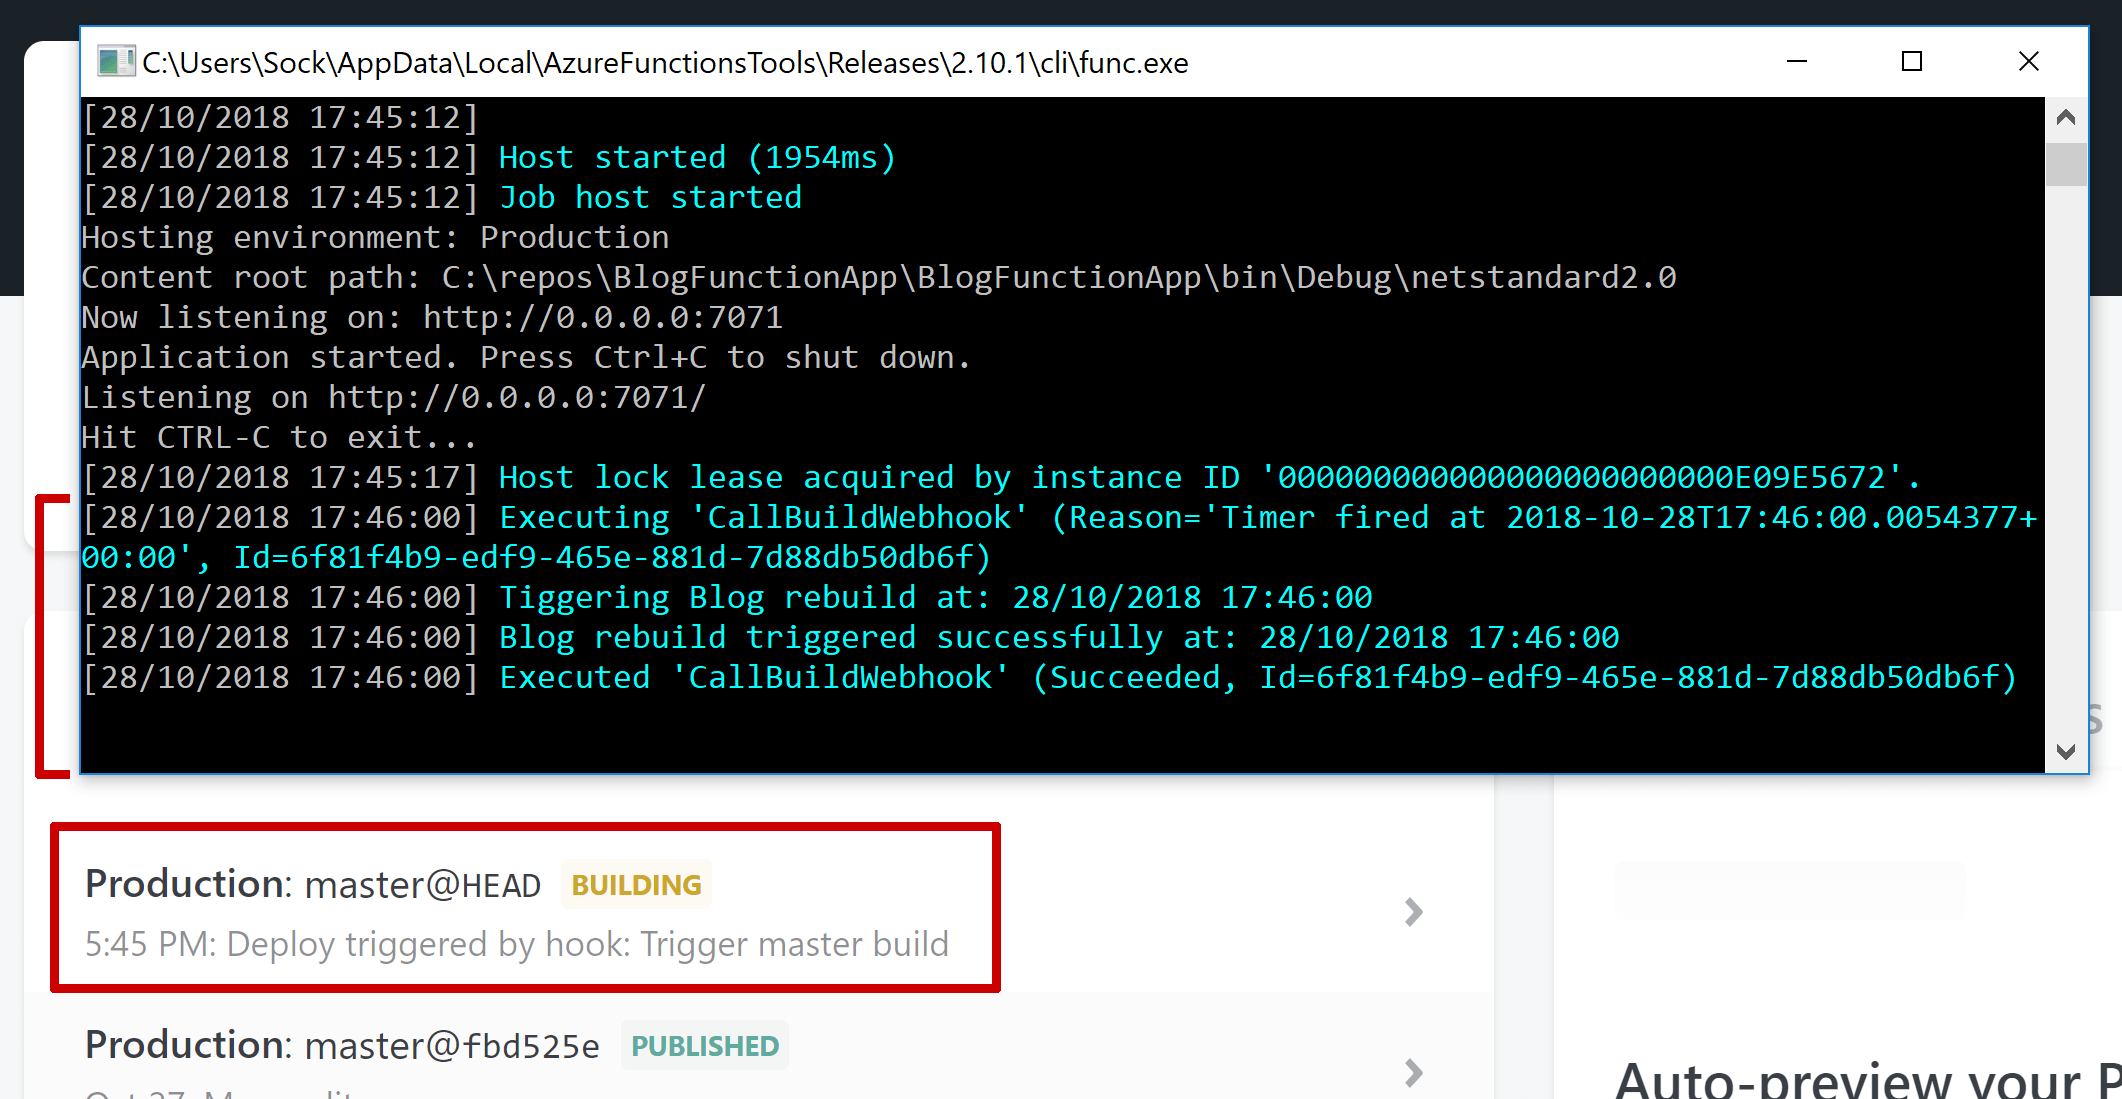 Triggering a build with Azure Functions